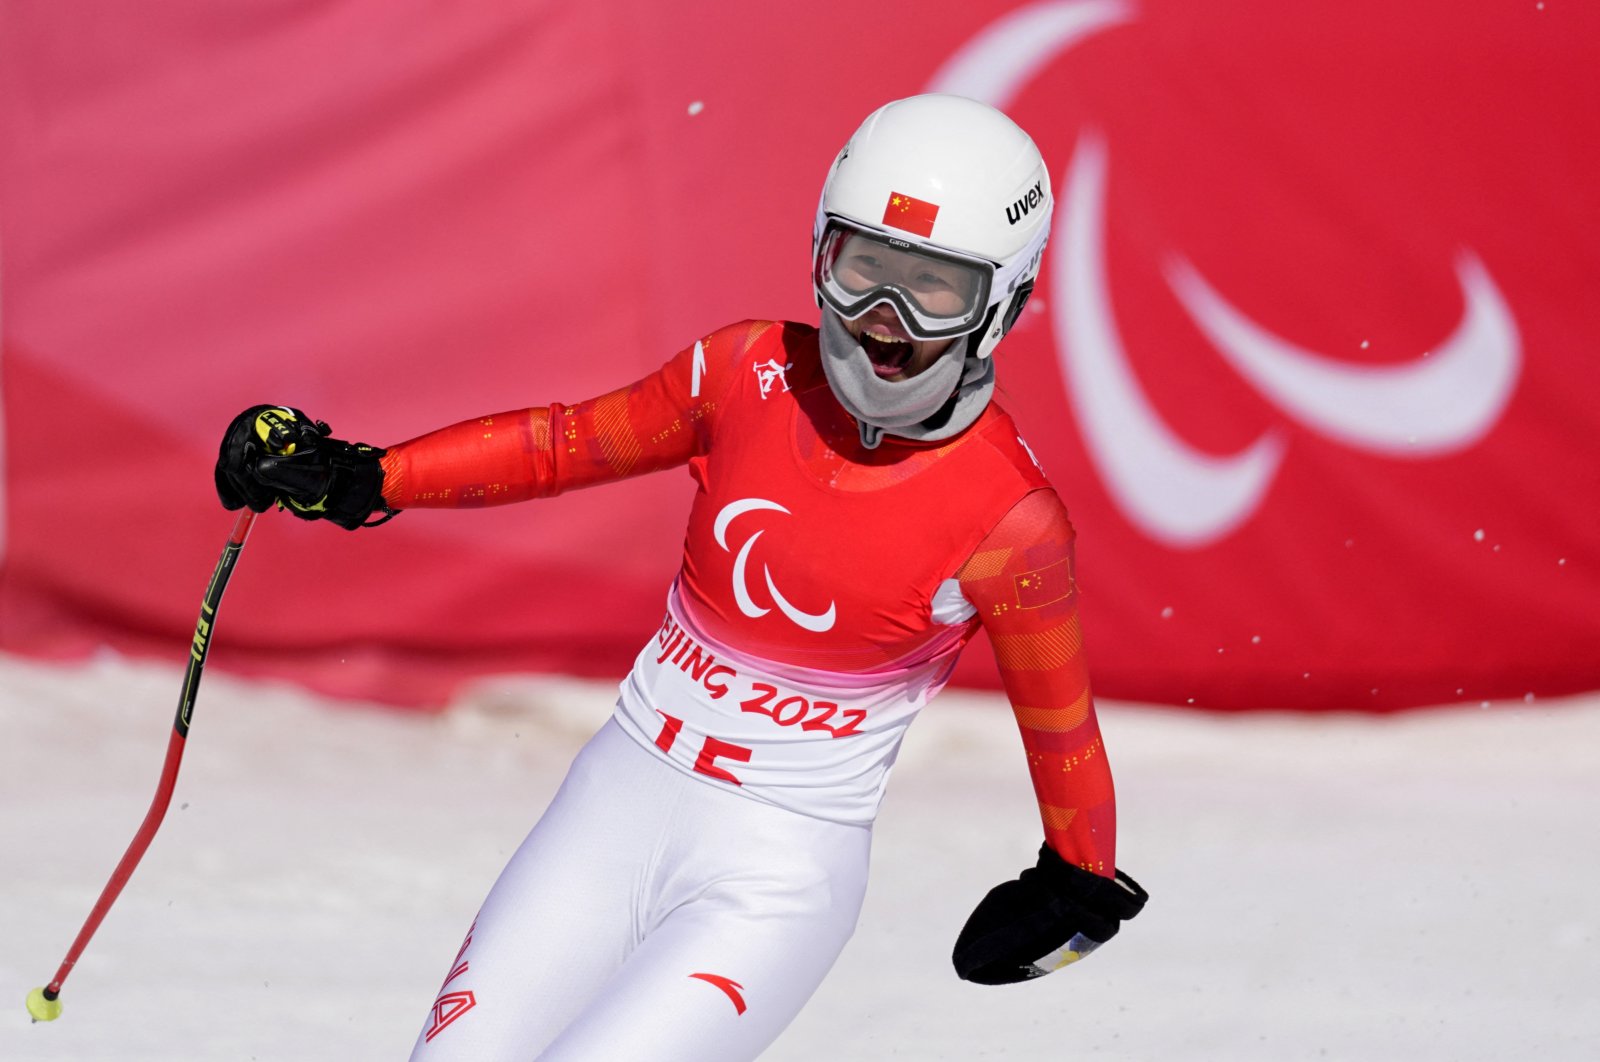 China&#039;s Zhang Mengqiu reacts after her run in the Beijing 2022 Winter Paralympics para-alpine skiing event, Yanqing, China, March 6, 2022. (Reuters Photo)